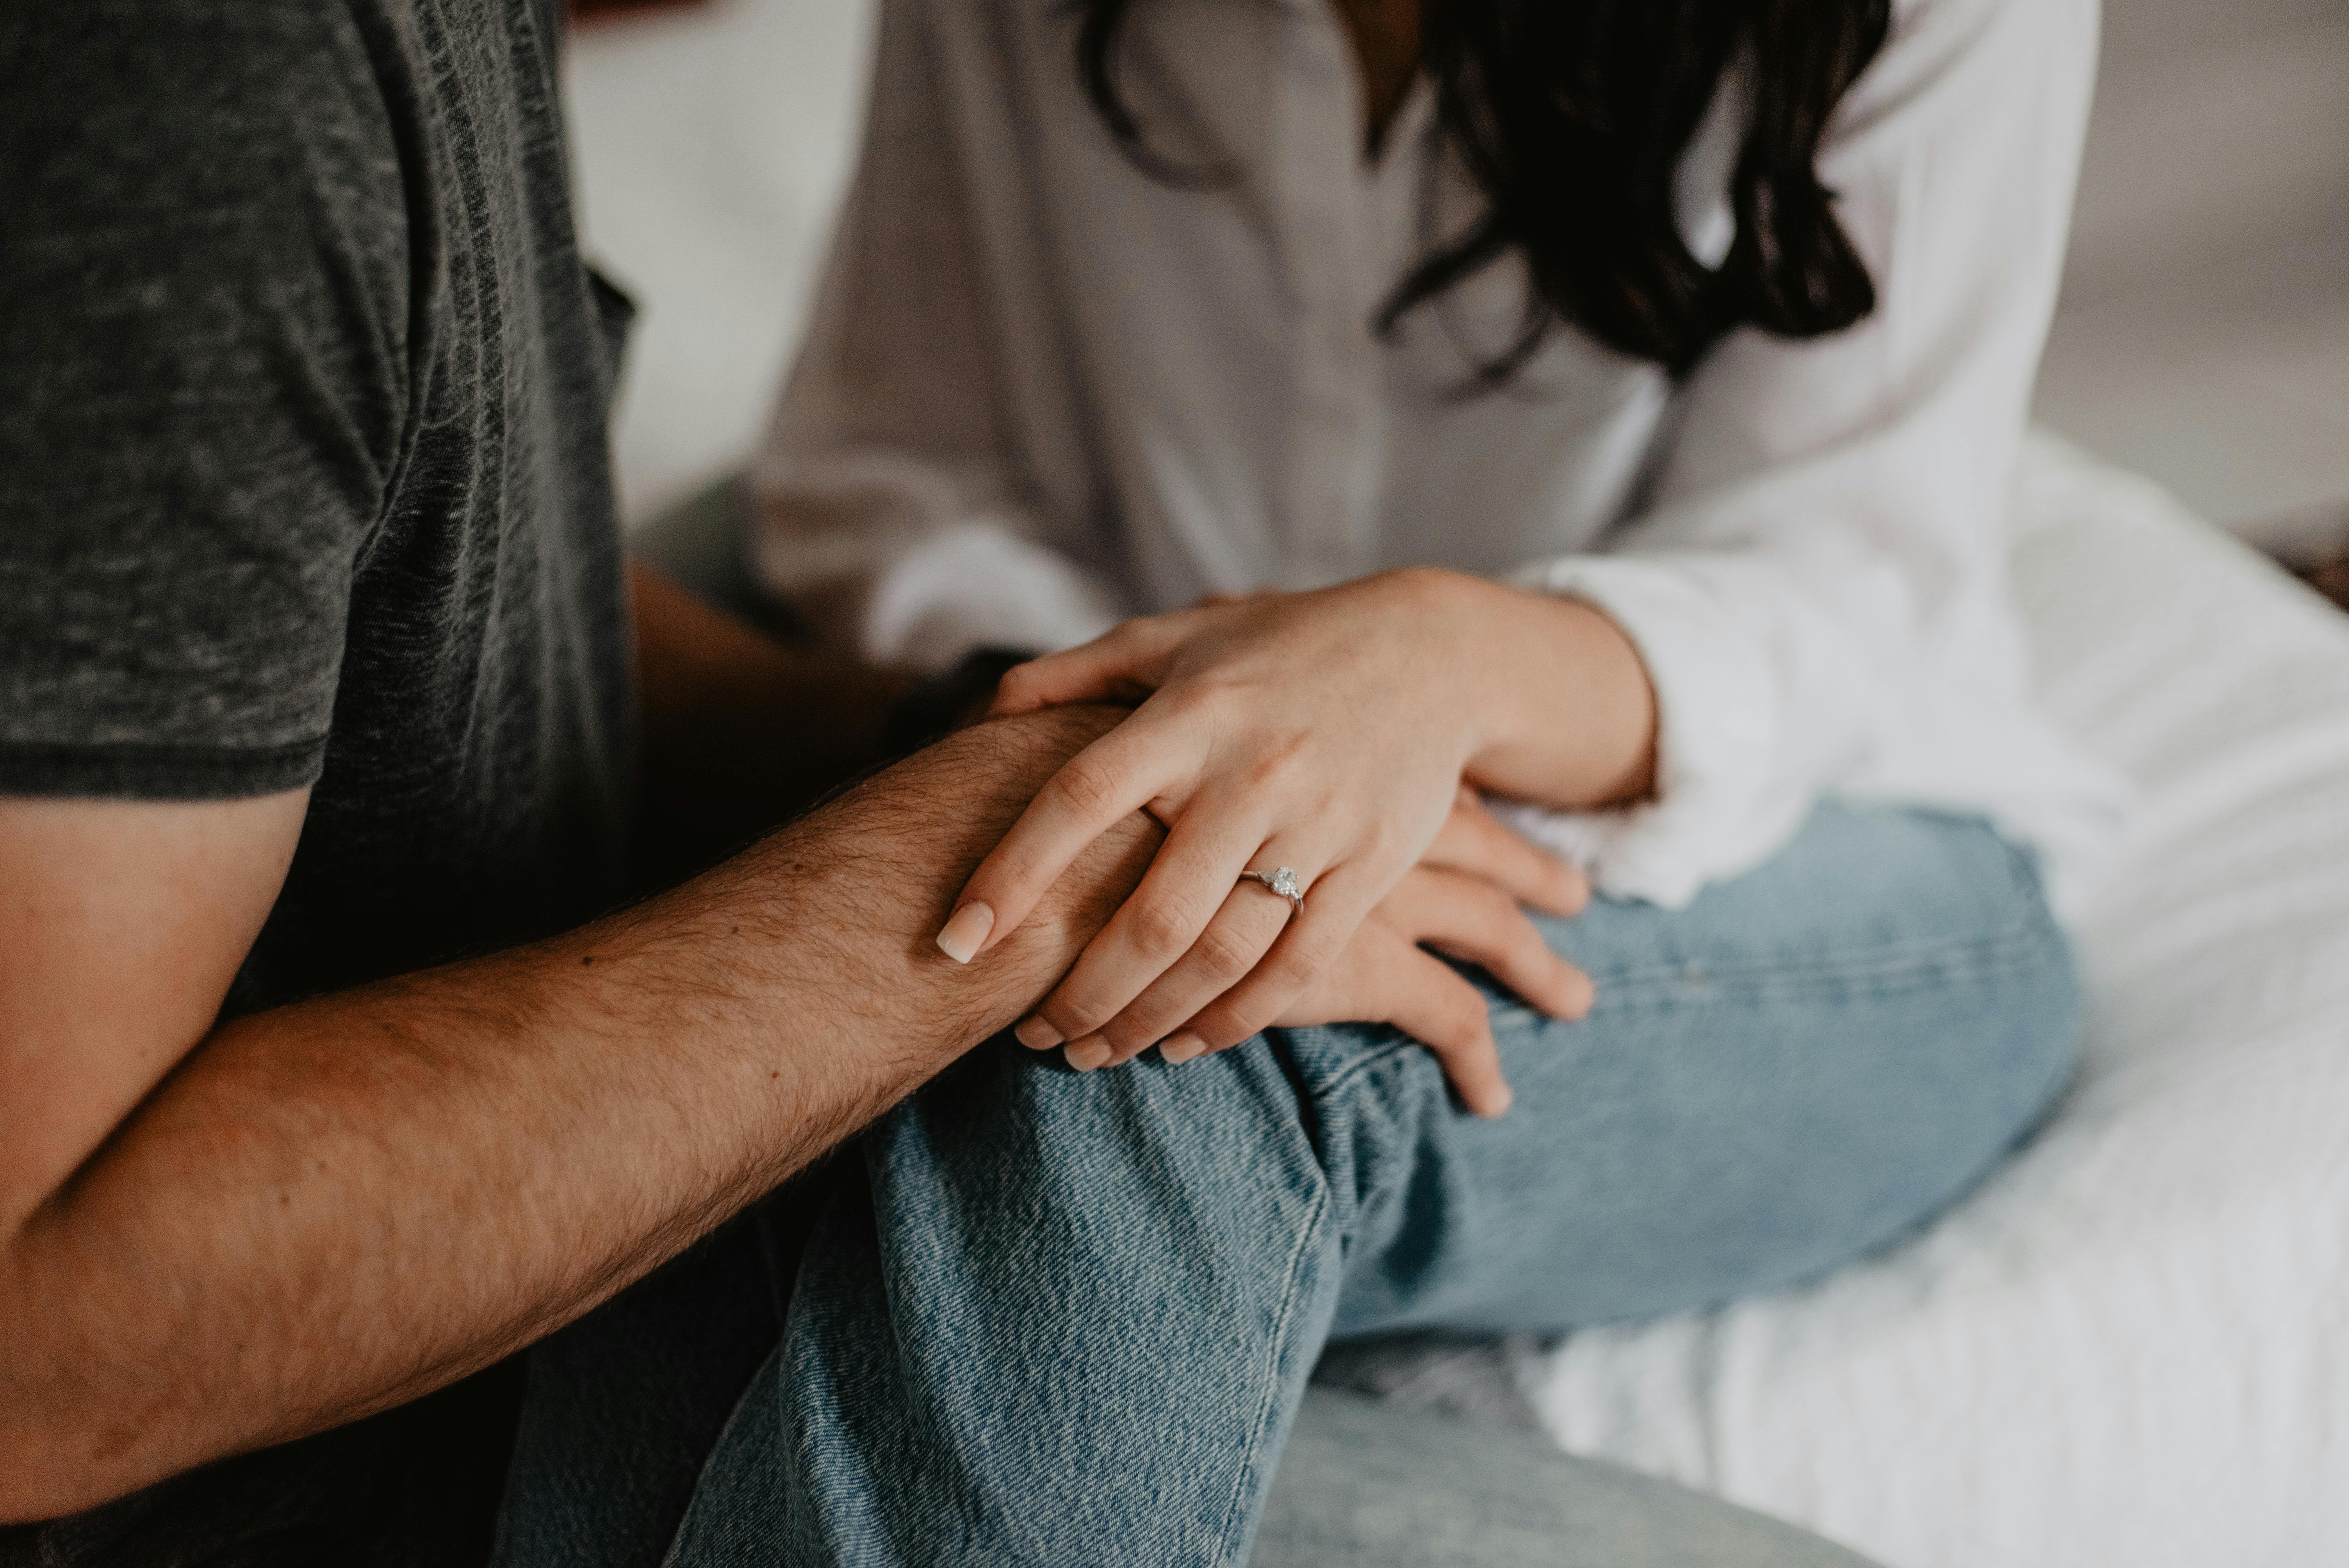 A woman holding a man's hand | Source: Pexels